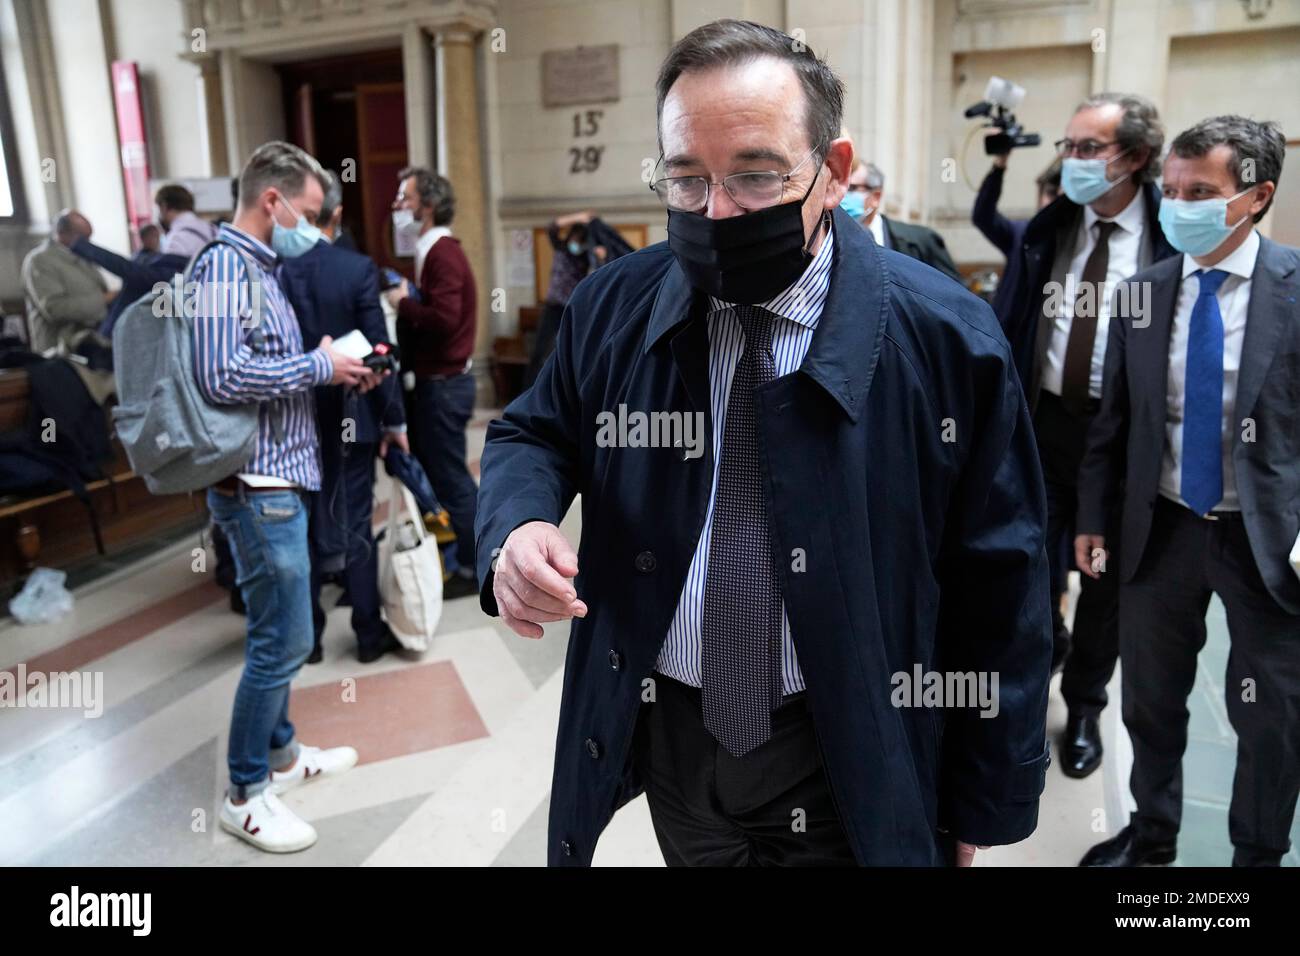 CEO of Swiss bank UBS France Jean-Frederic de Leusse leaves the courtroom  after the French court postponed the verdict of UBS tax evasion at Paris'  Appeals court, Monday, Sept. 27, 2021. Swiss